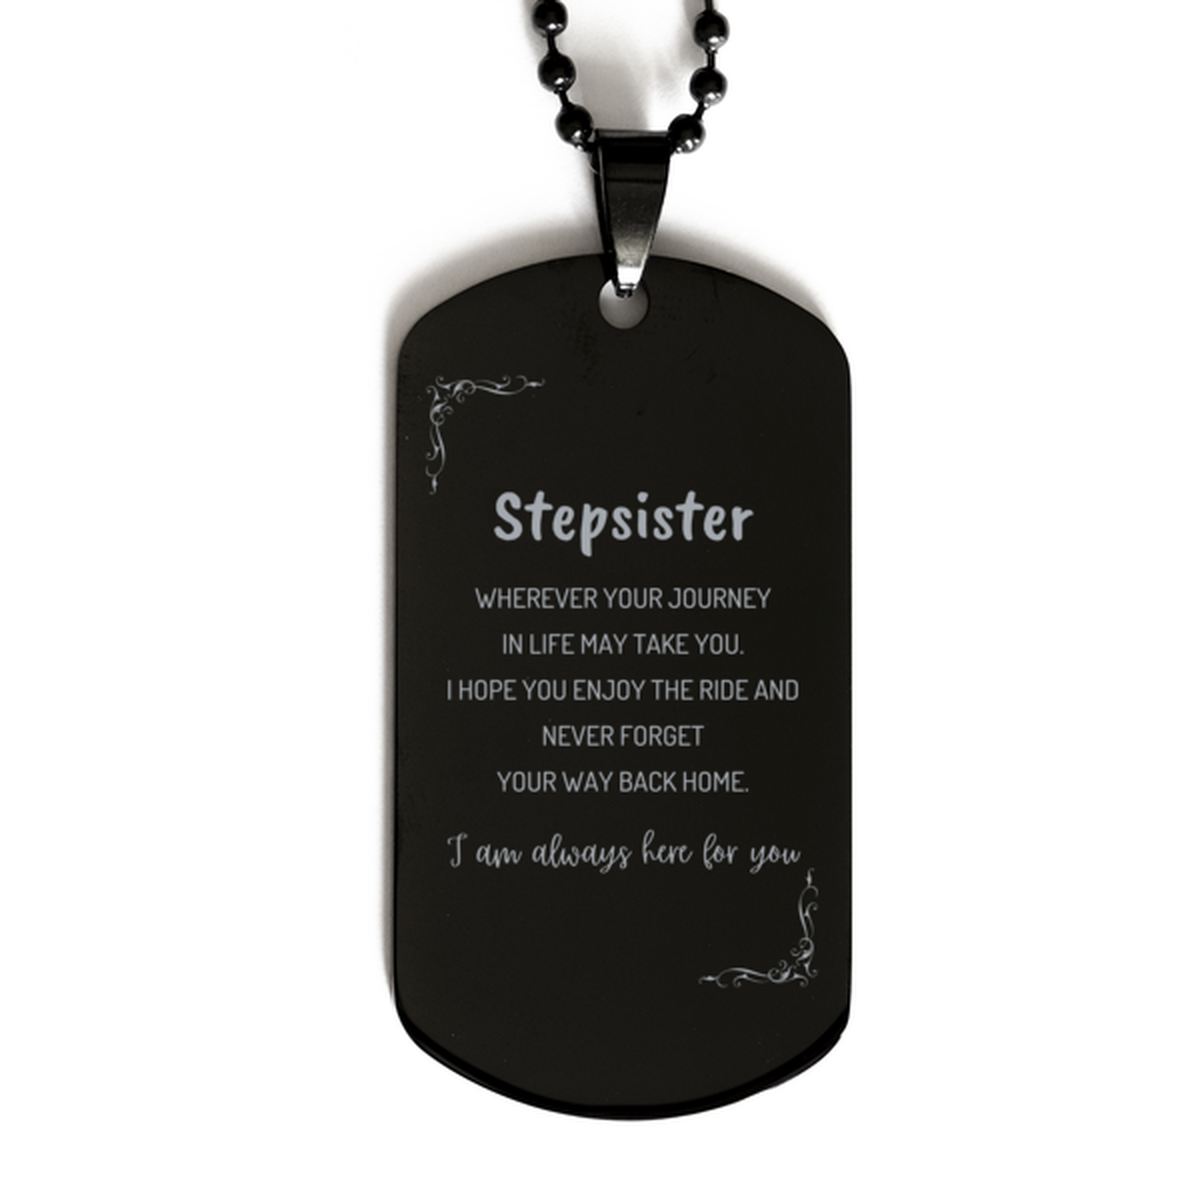 Stepsister wherever your journey in life may take you, I am always here for you Stepsister Black Dog Tag, Awesome Christmas Gifts For Stepsister, Stepsister Birthday Gifts for Men Women Family Loved One